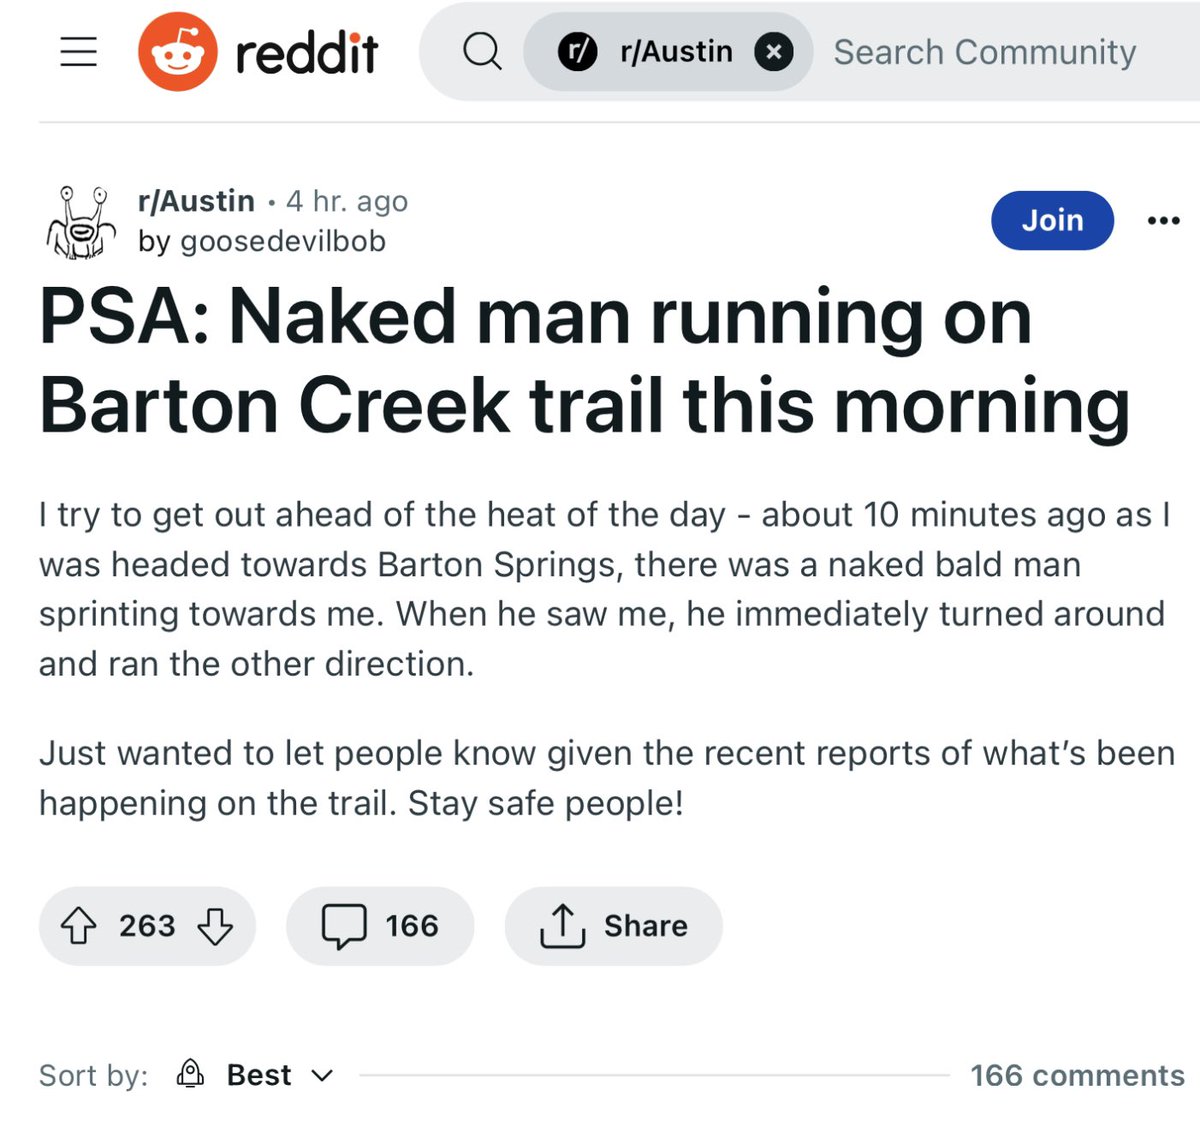 Naked bald man running on Barton Creek trail this morning, guessing it was B-Swizzle @bradswail (again)